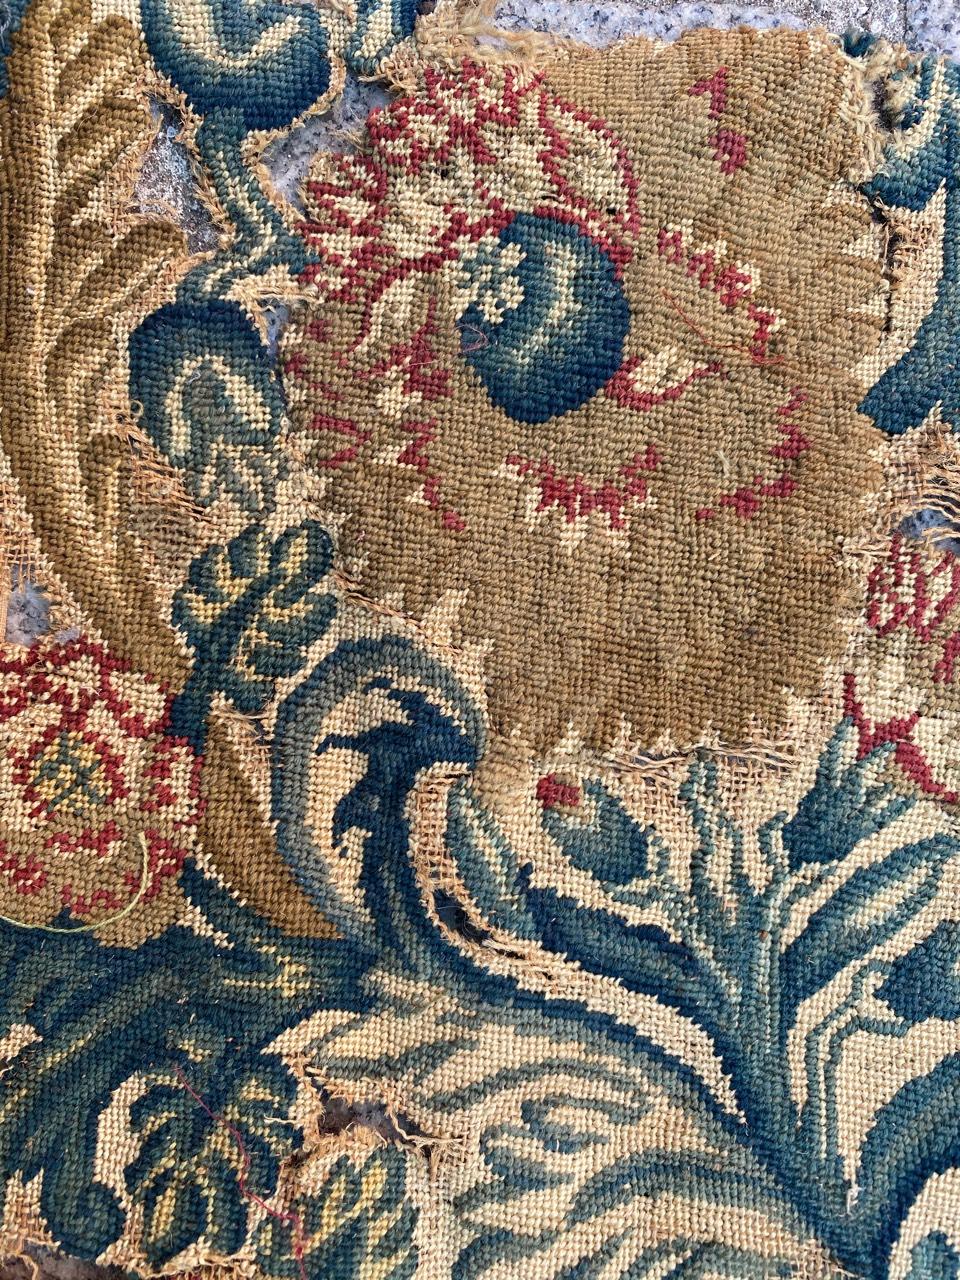 Beautiful Antique Distressed 18th Century Needlepoint Tapestry 5